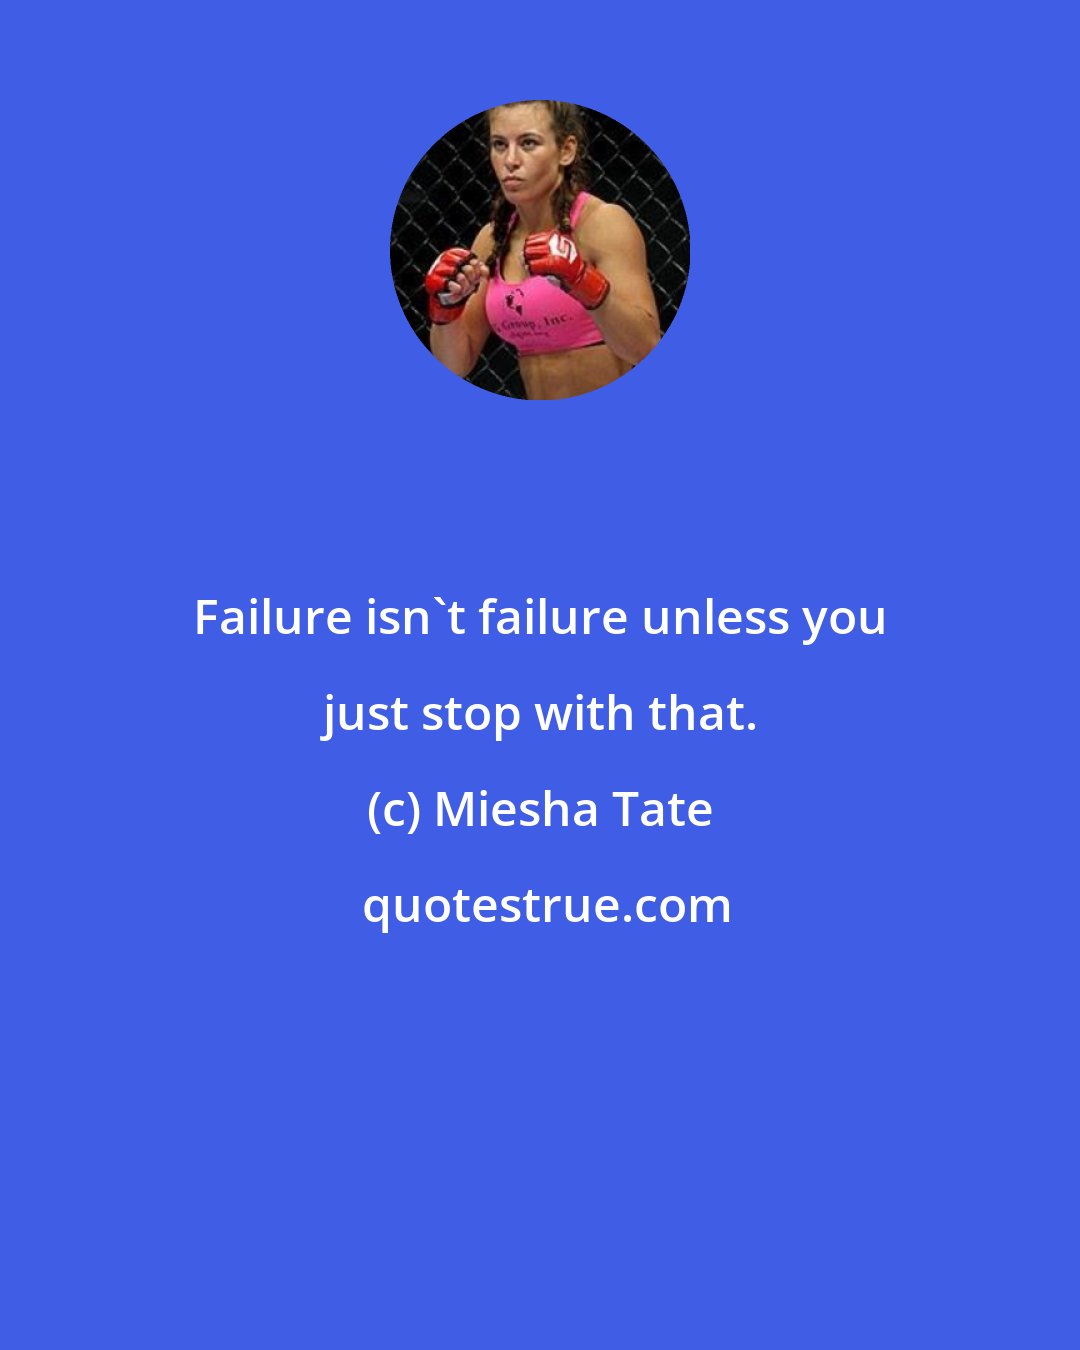 Miesha Tate: Failure isn't failure unless you just stop with that.